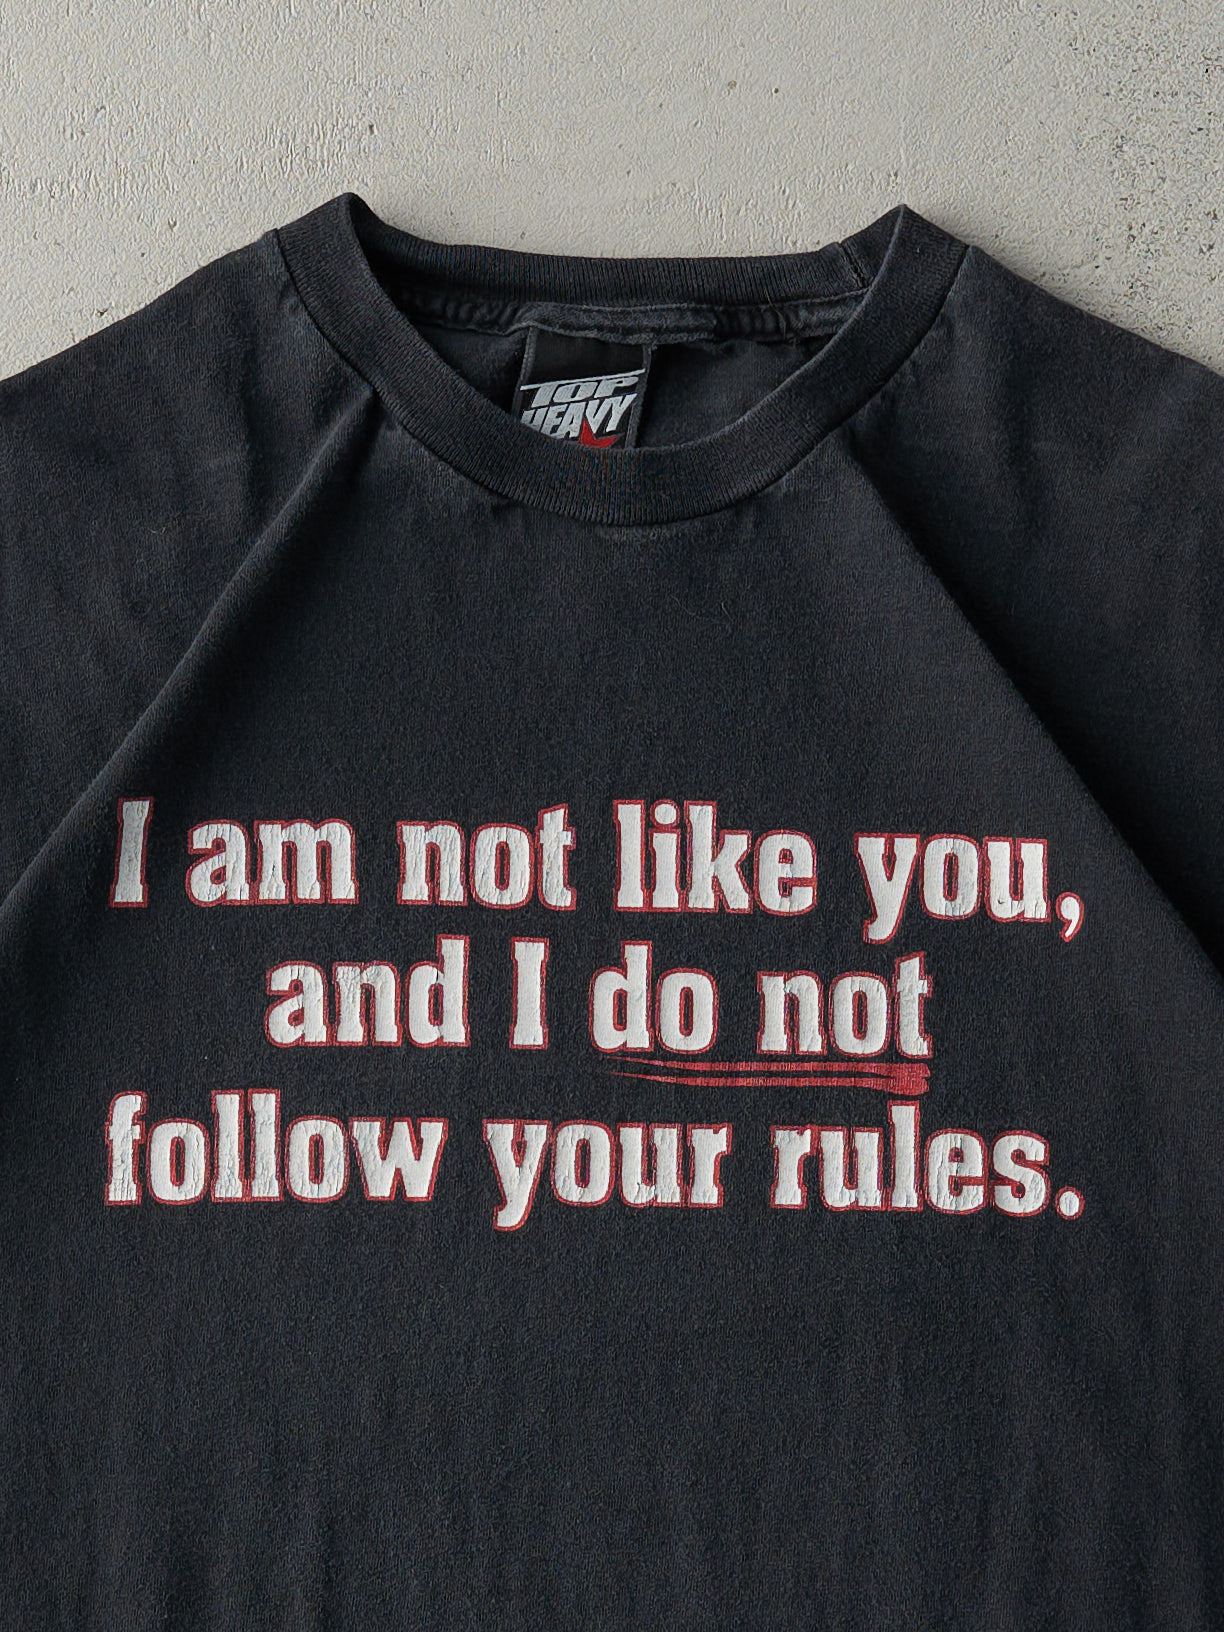 Vintage 03' Faded Black "I Am Not Like You" Tee (M/L)